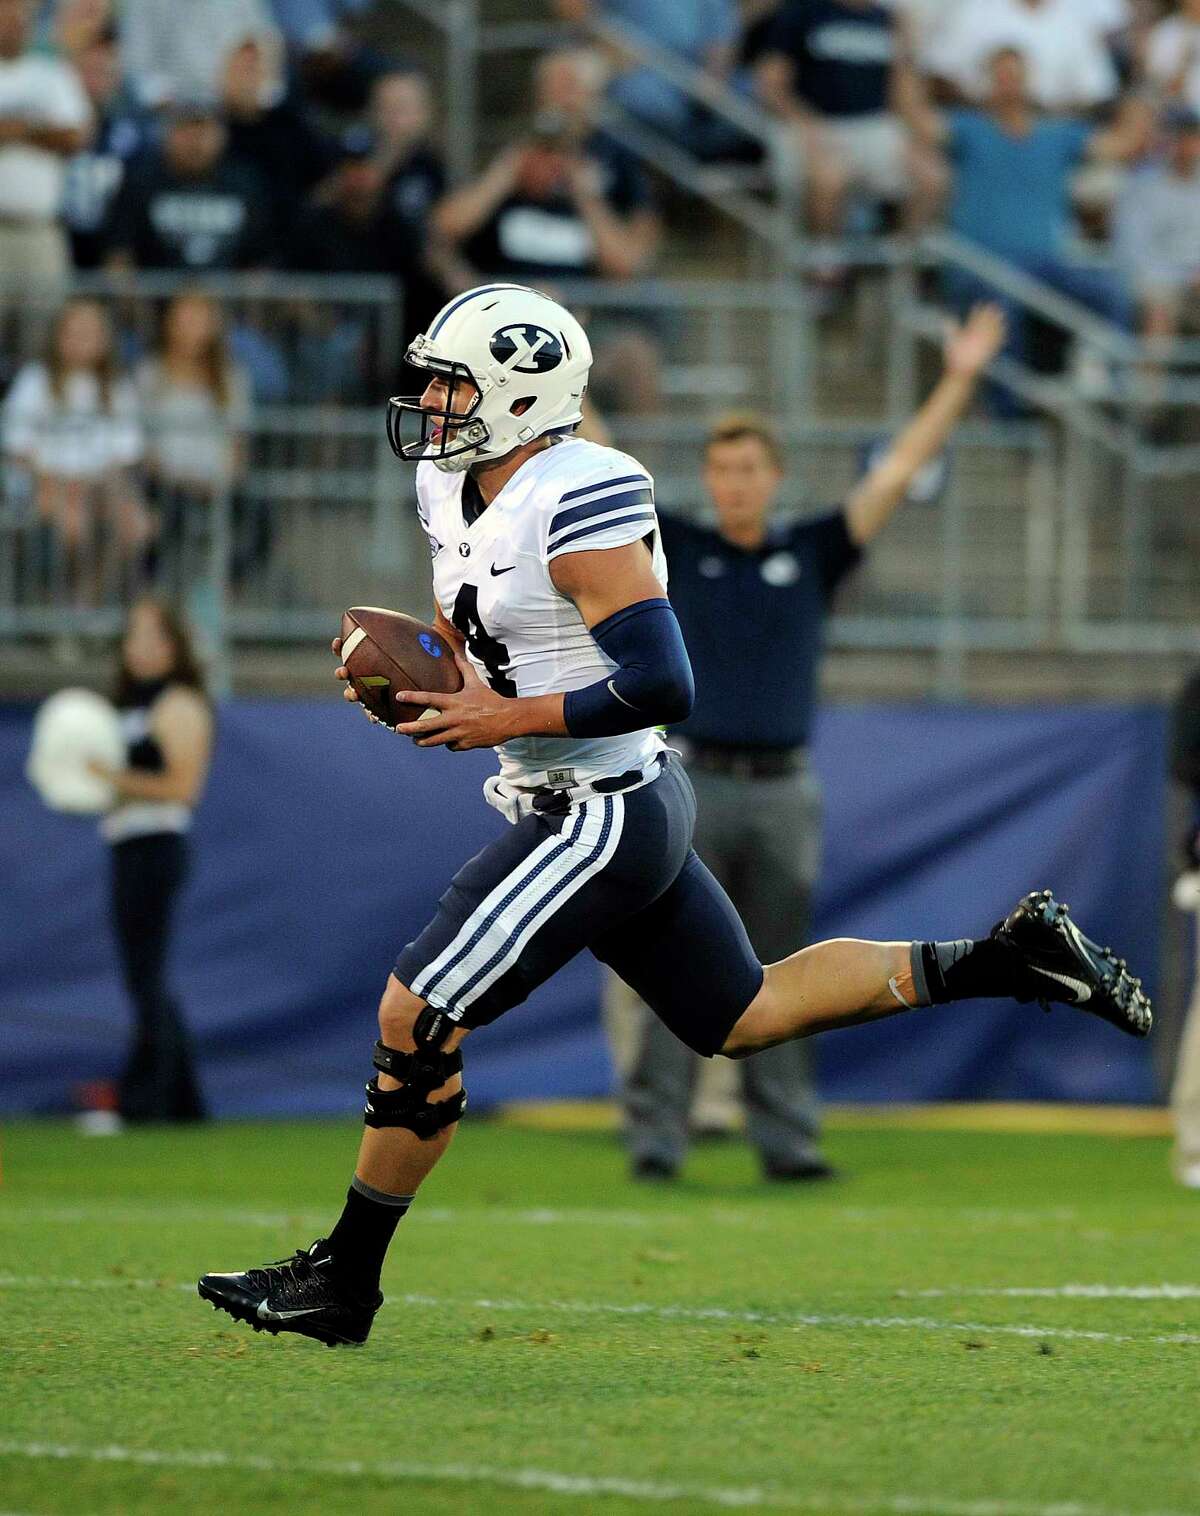 BYU quarterback Taysom Hill (4) runs for a touchdown during the Cougars’ 35-10 win over UConn on Friday night at Rentschler Field in East Hartford.